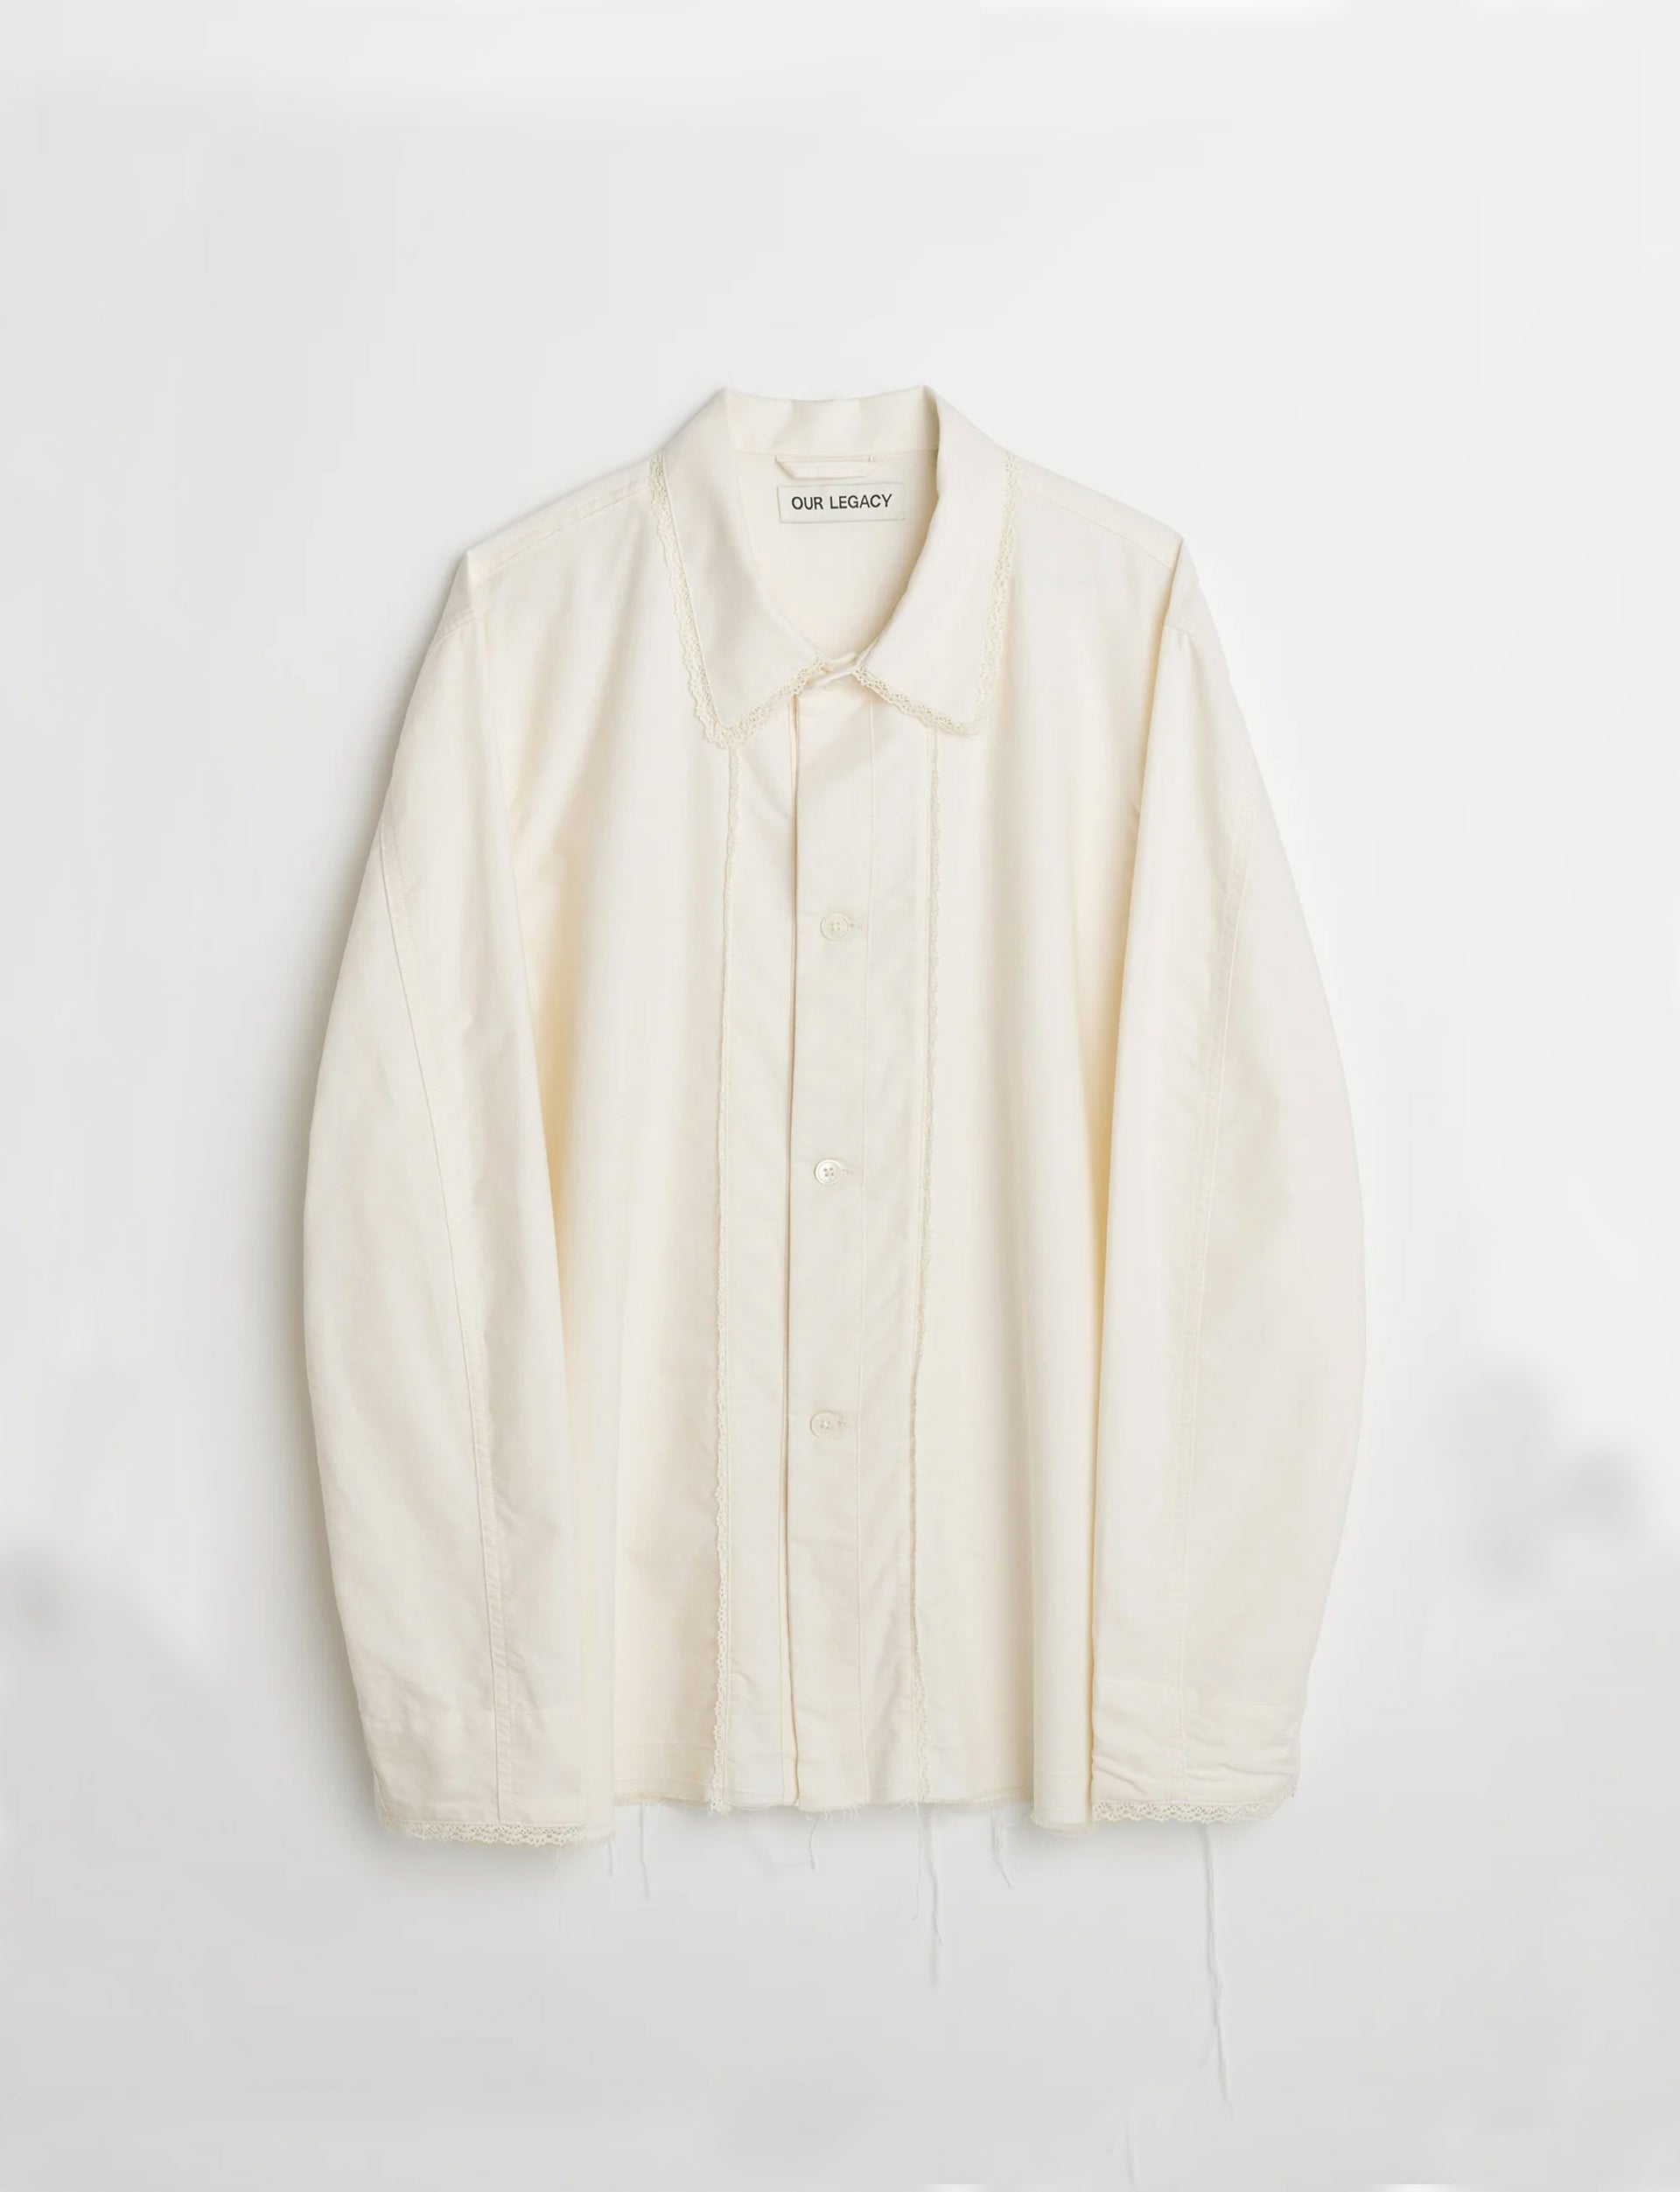 OUR LEGACY BOX SHIRT ANTIQUE WHITE OXFORD LACE